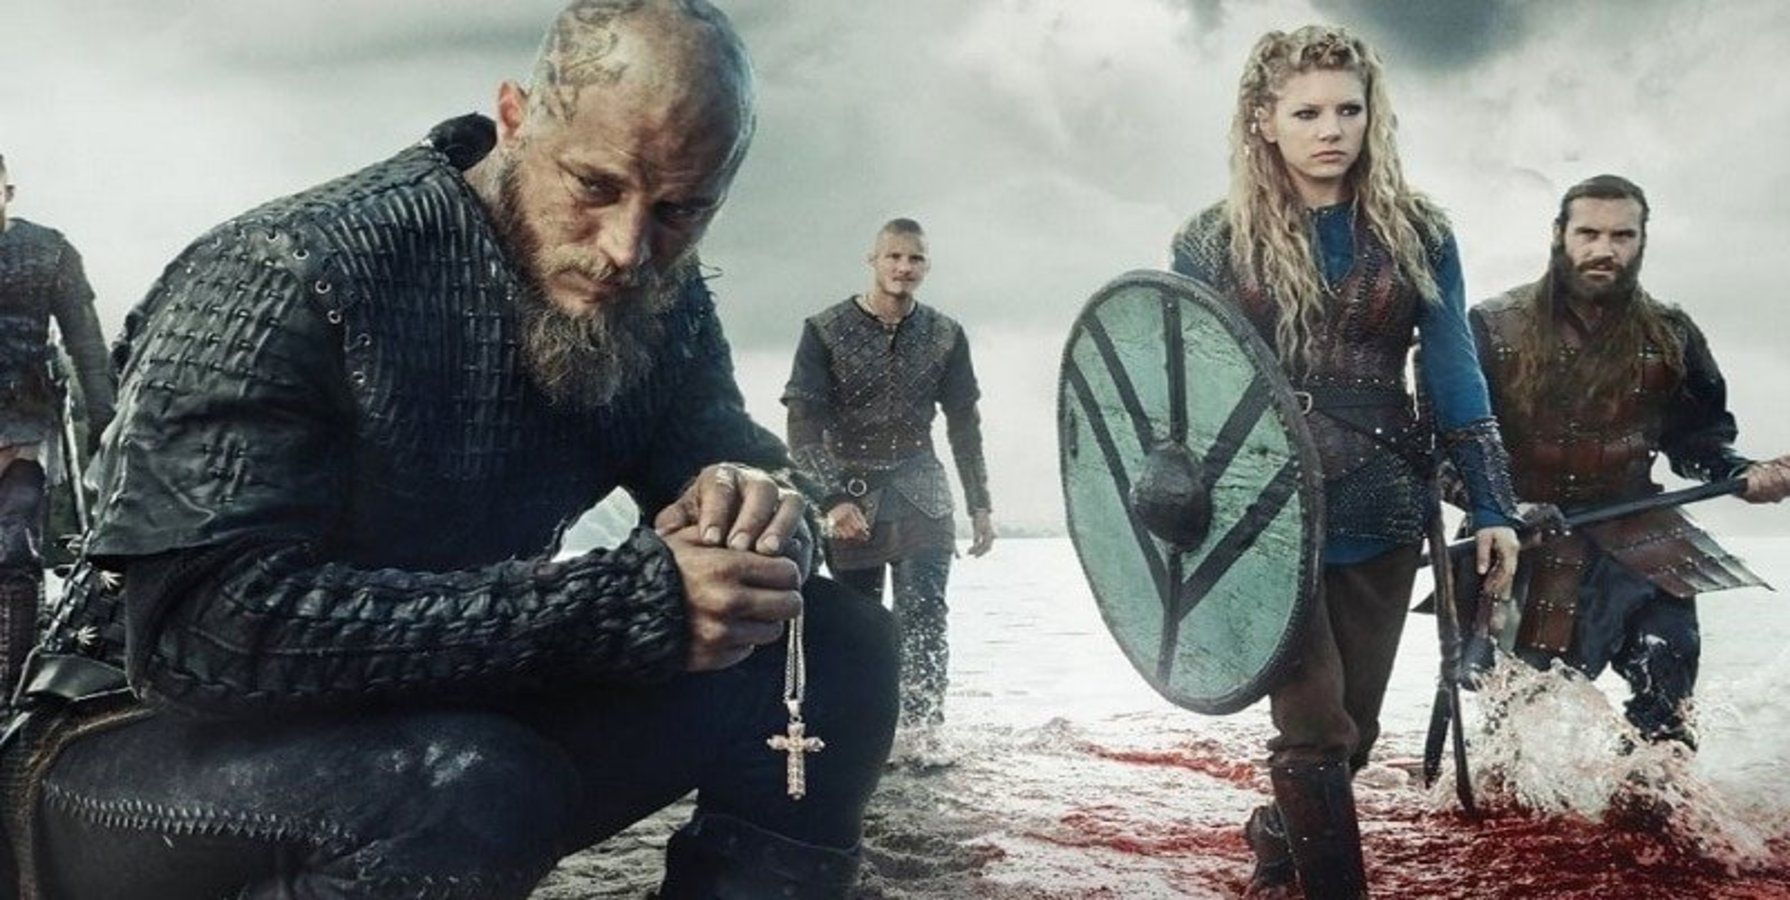 Vikings' Finale Tests the Limits of Young Love (Exclusive Video)